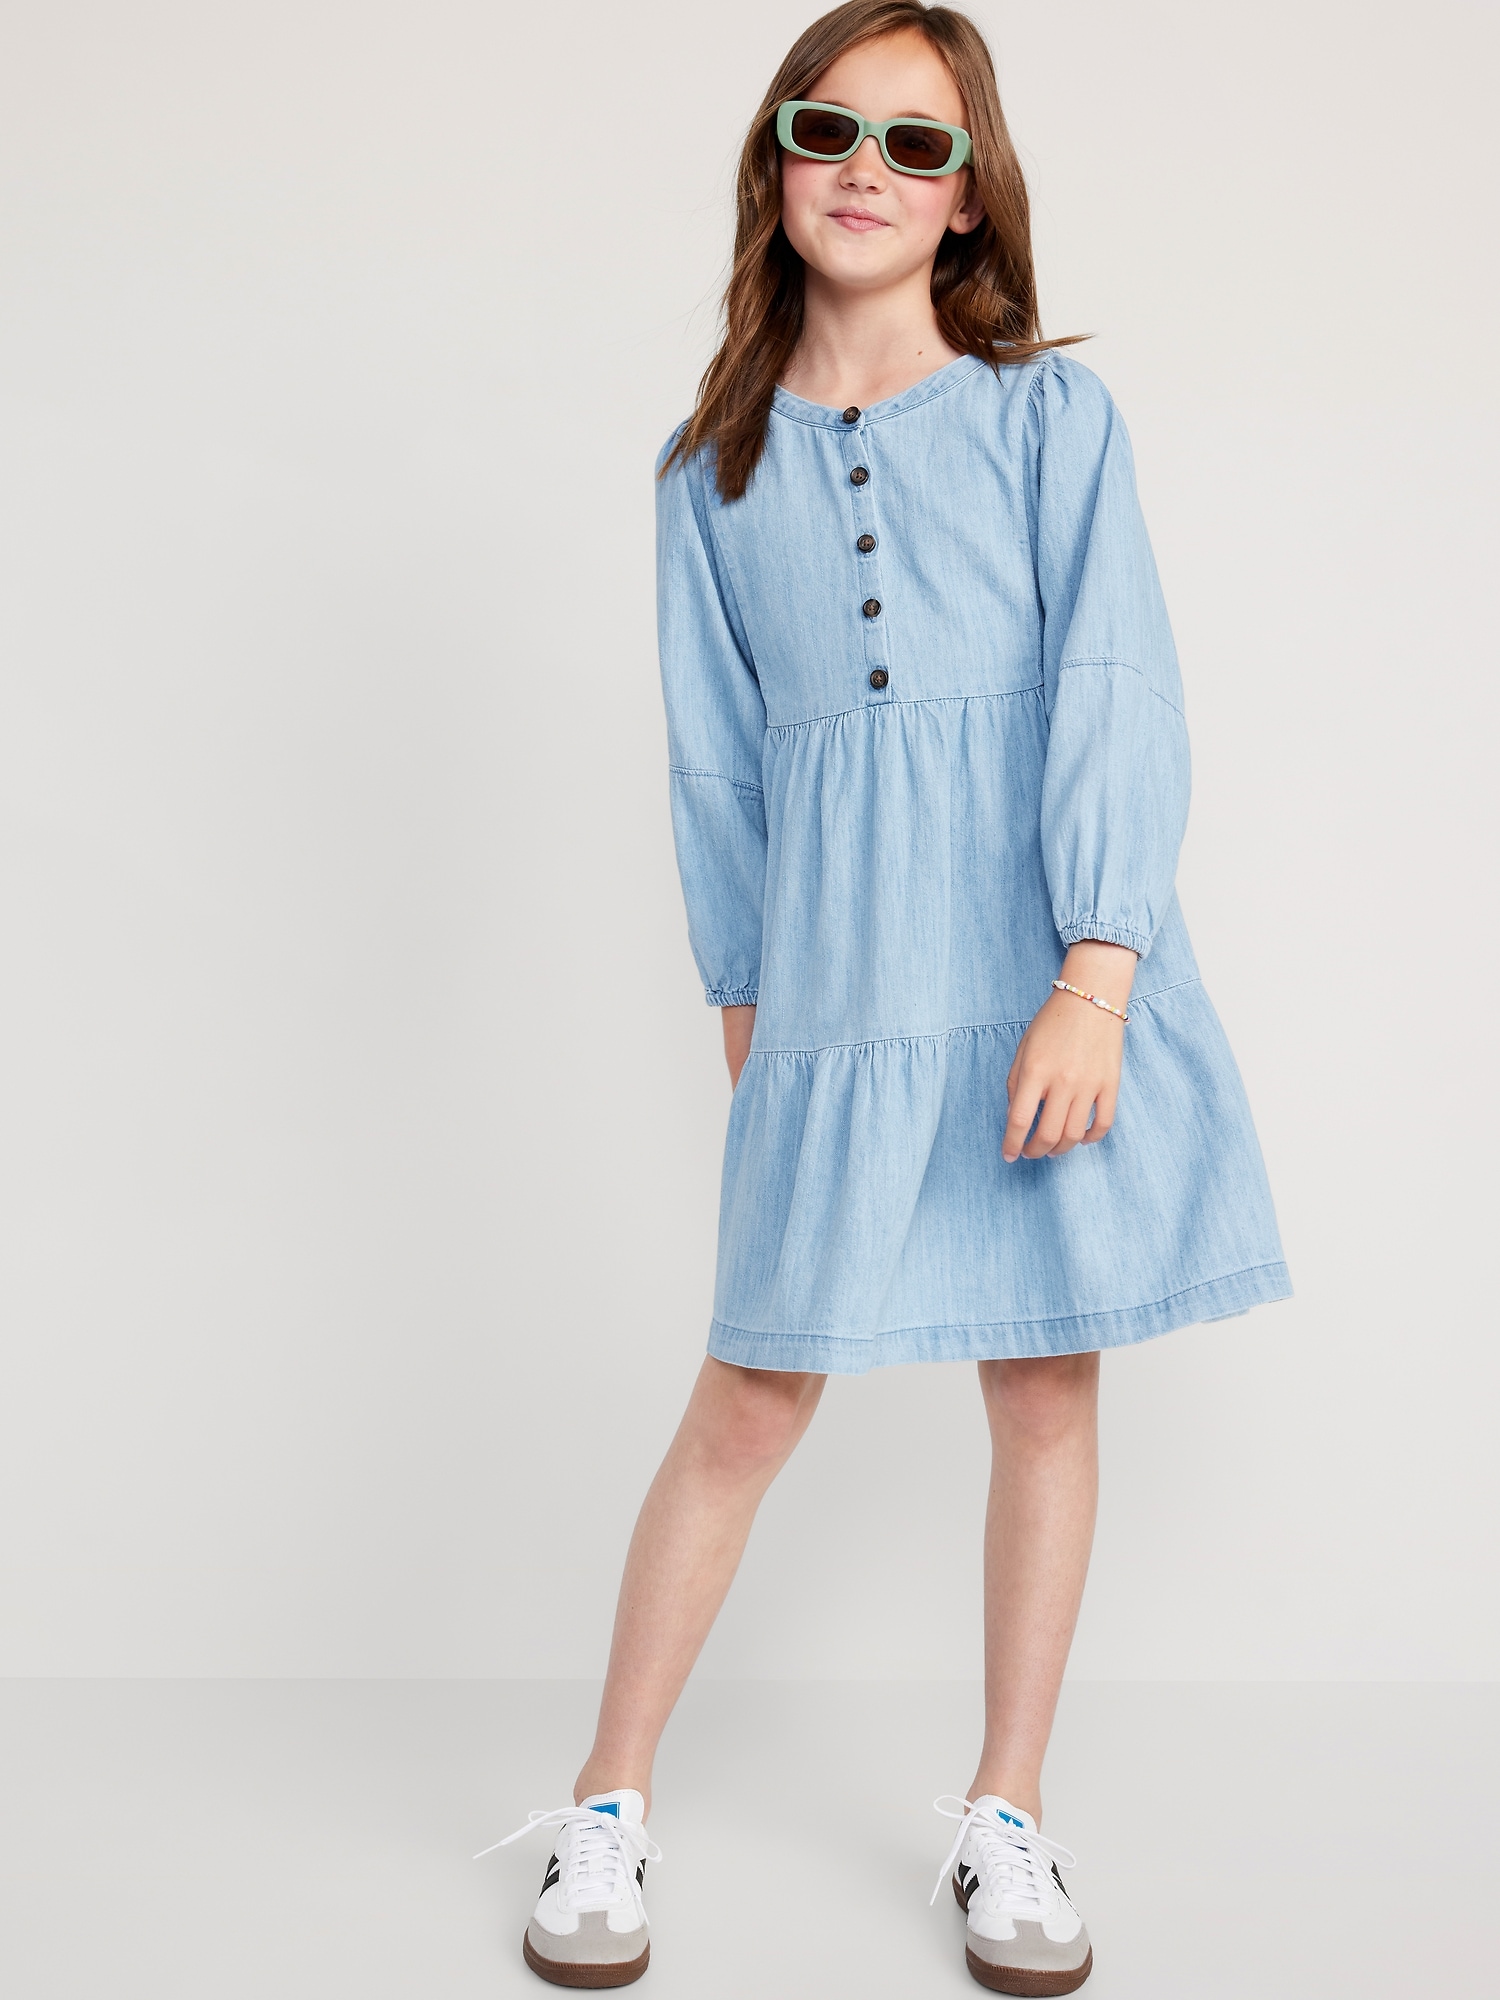 Long-Sleeve Button-Front Tiered Swing Dress for Girls | Old Navy